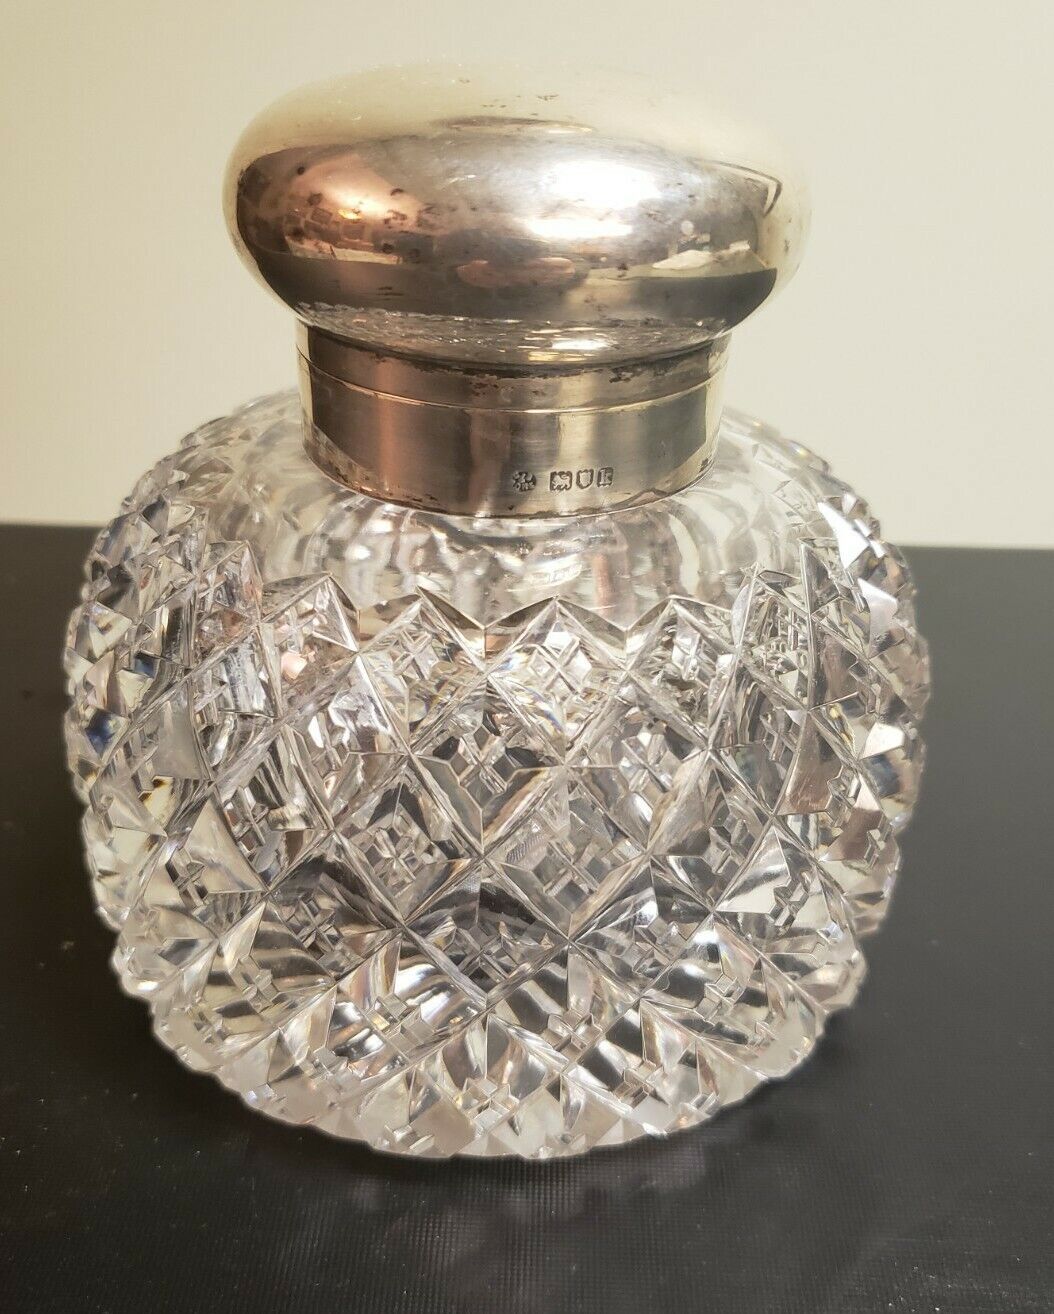 C.1905 OVERSIZE ENGLISH CUT GLASS INKWELL INKPOT 3 LBS. 14 OZ. STERLING CAP